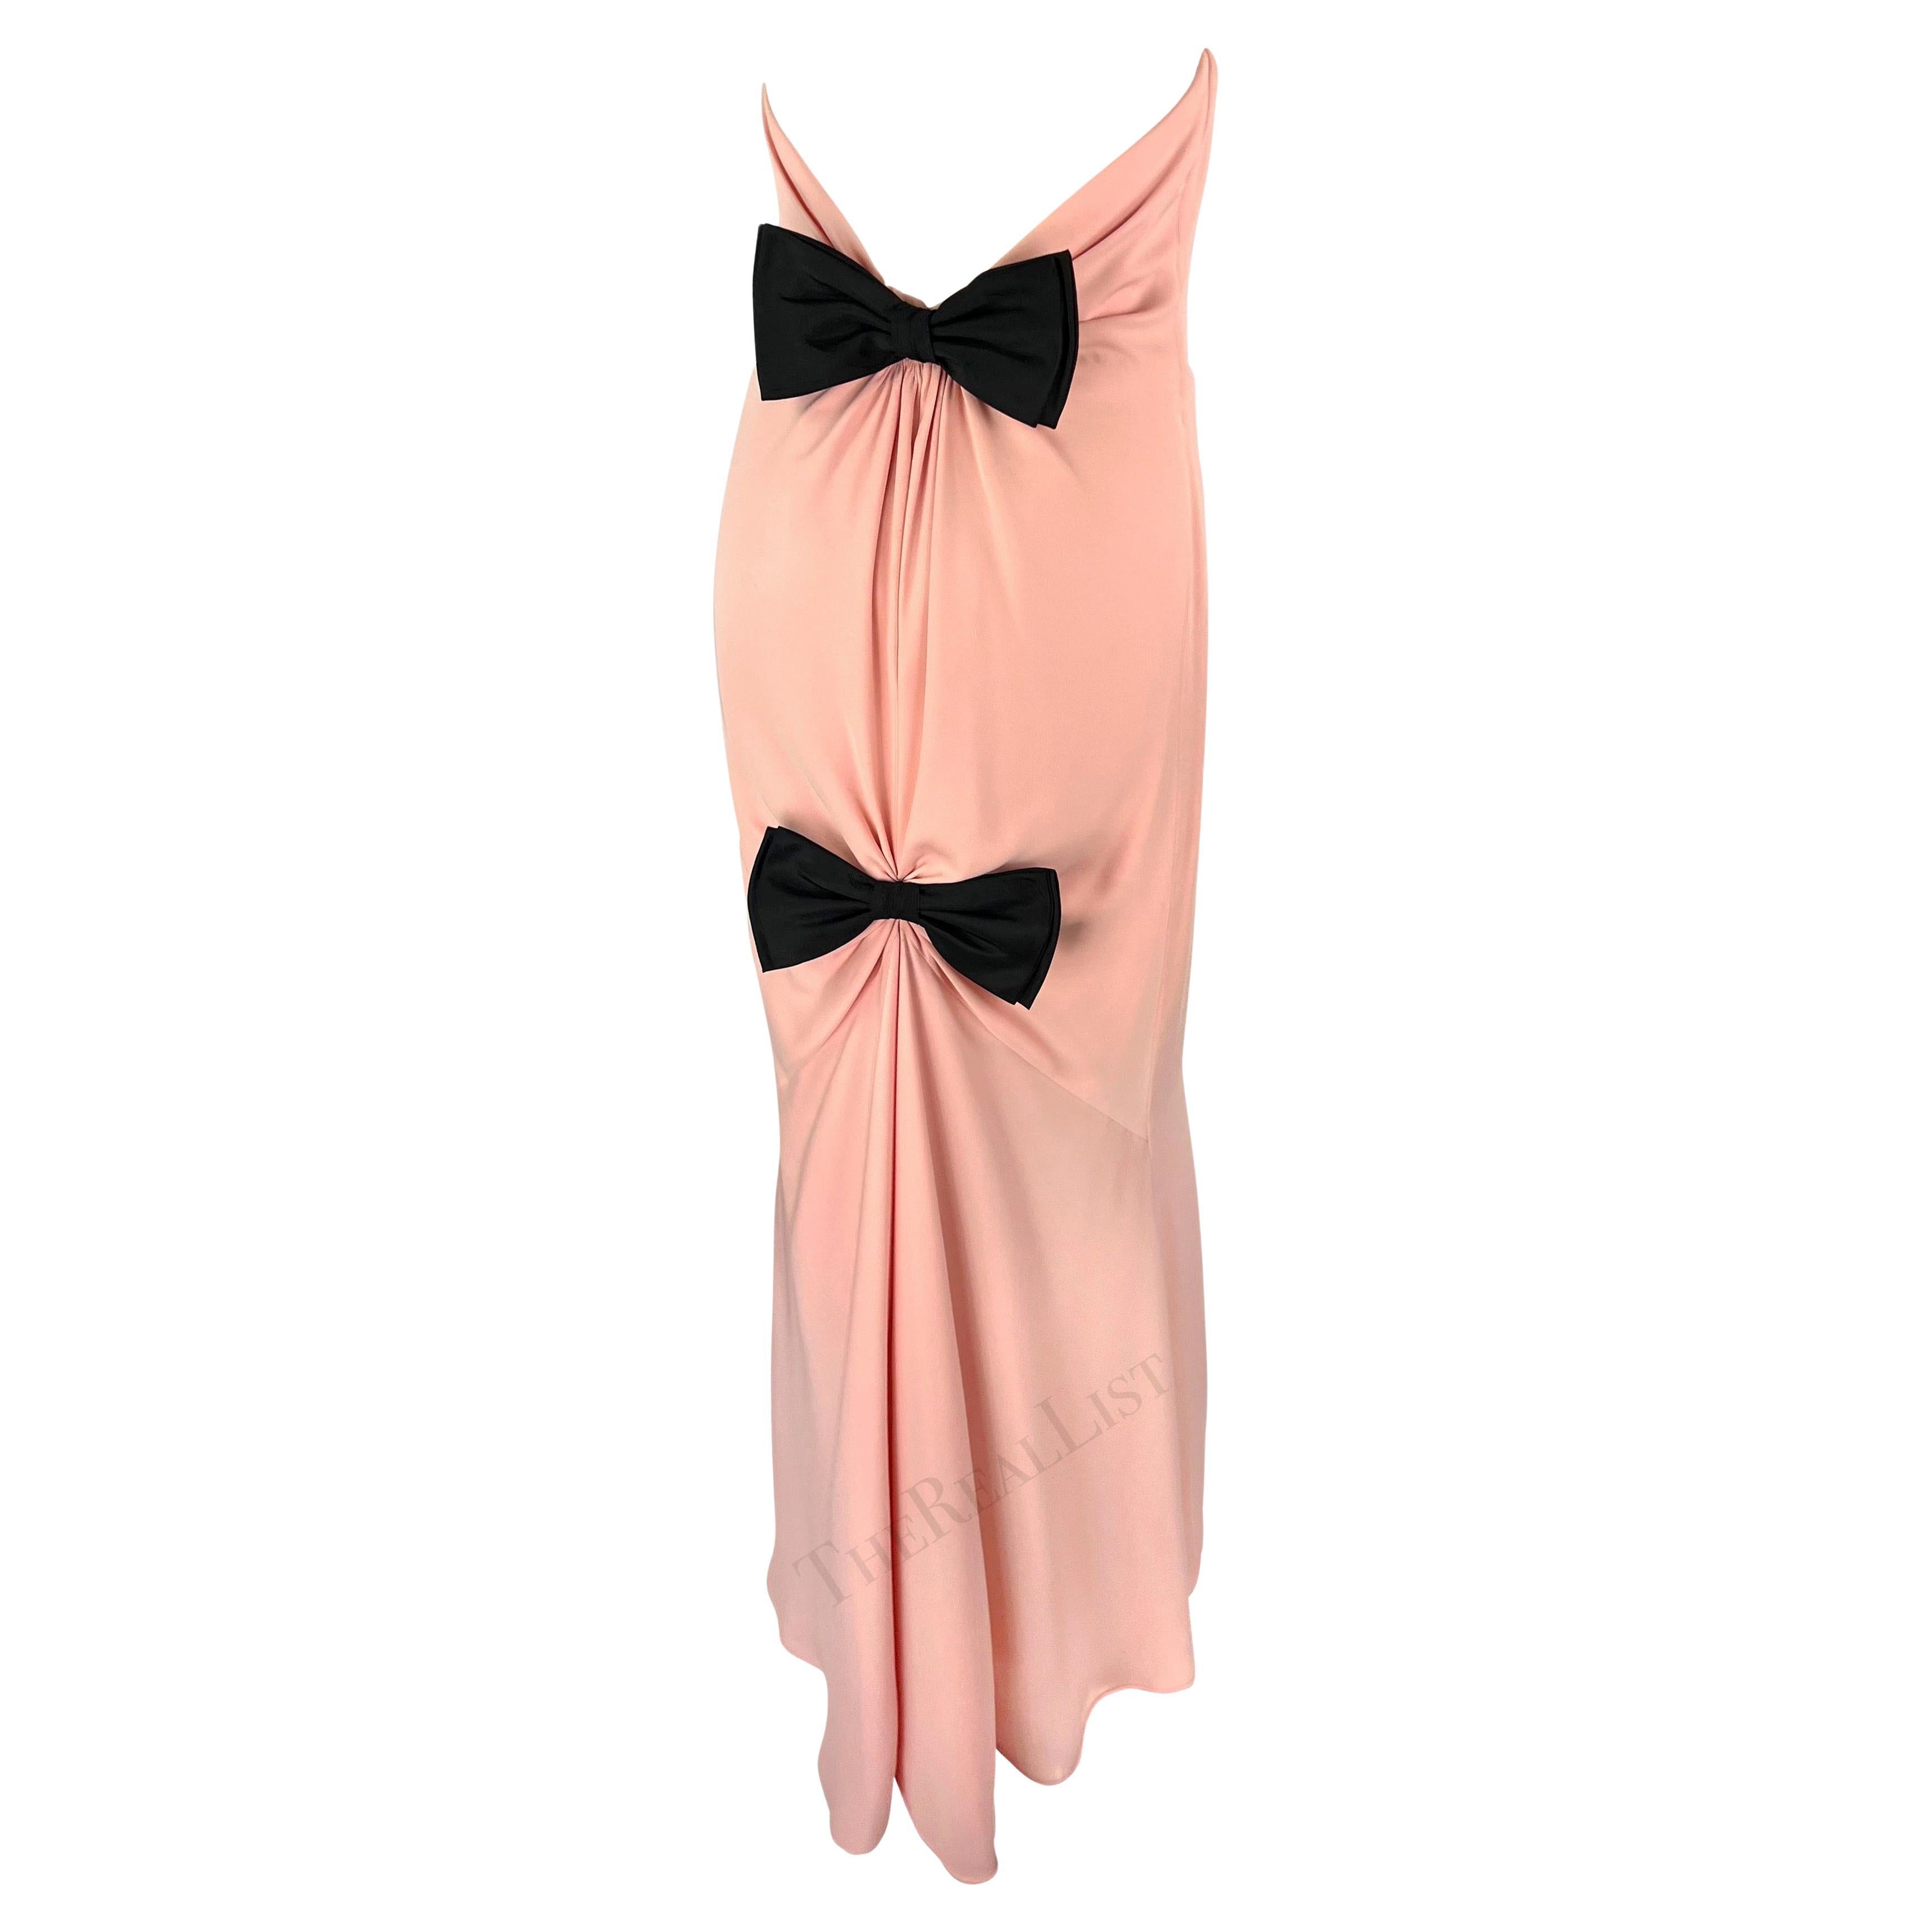 S/S 1985 Valentino Haute Couture Documented Pink Silk Chiffon Bow Strapless Gown For Sale 8